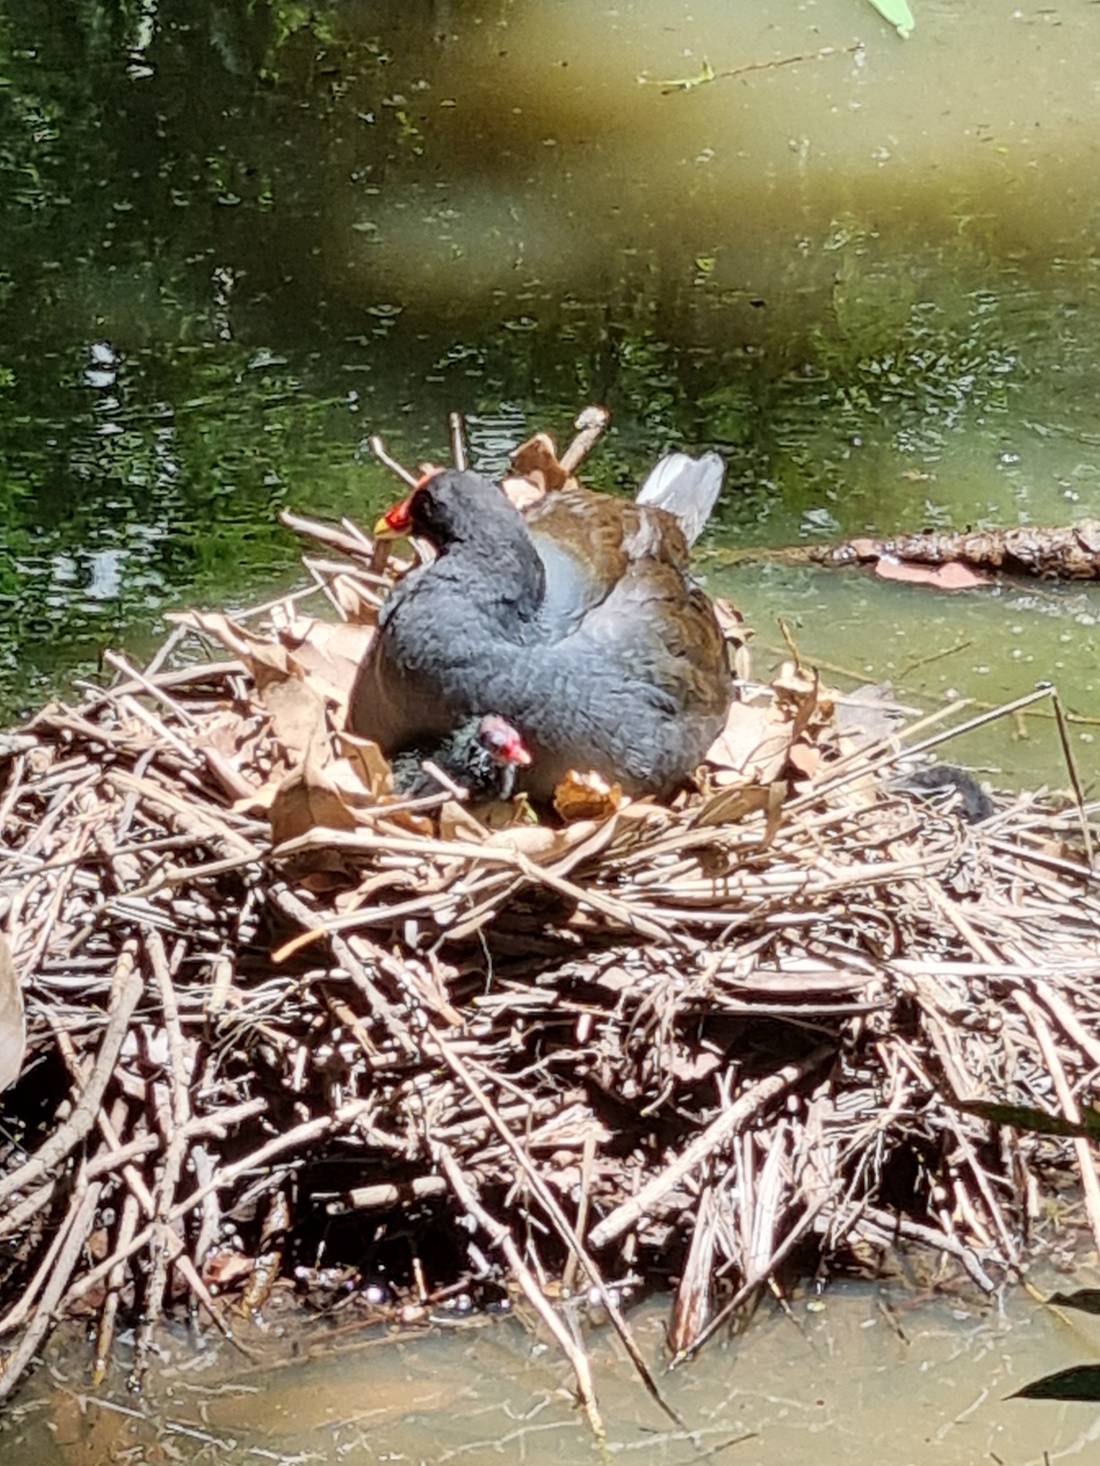 A nesting Dusky Moorhen with its chicks. I was so lucky, the chick only popped its head up for a second.